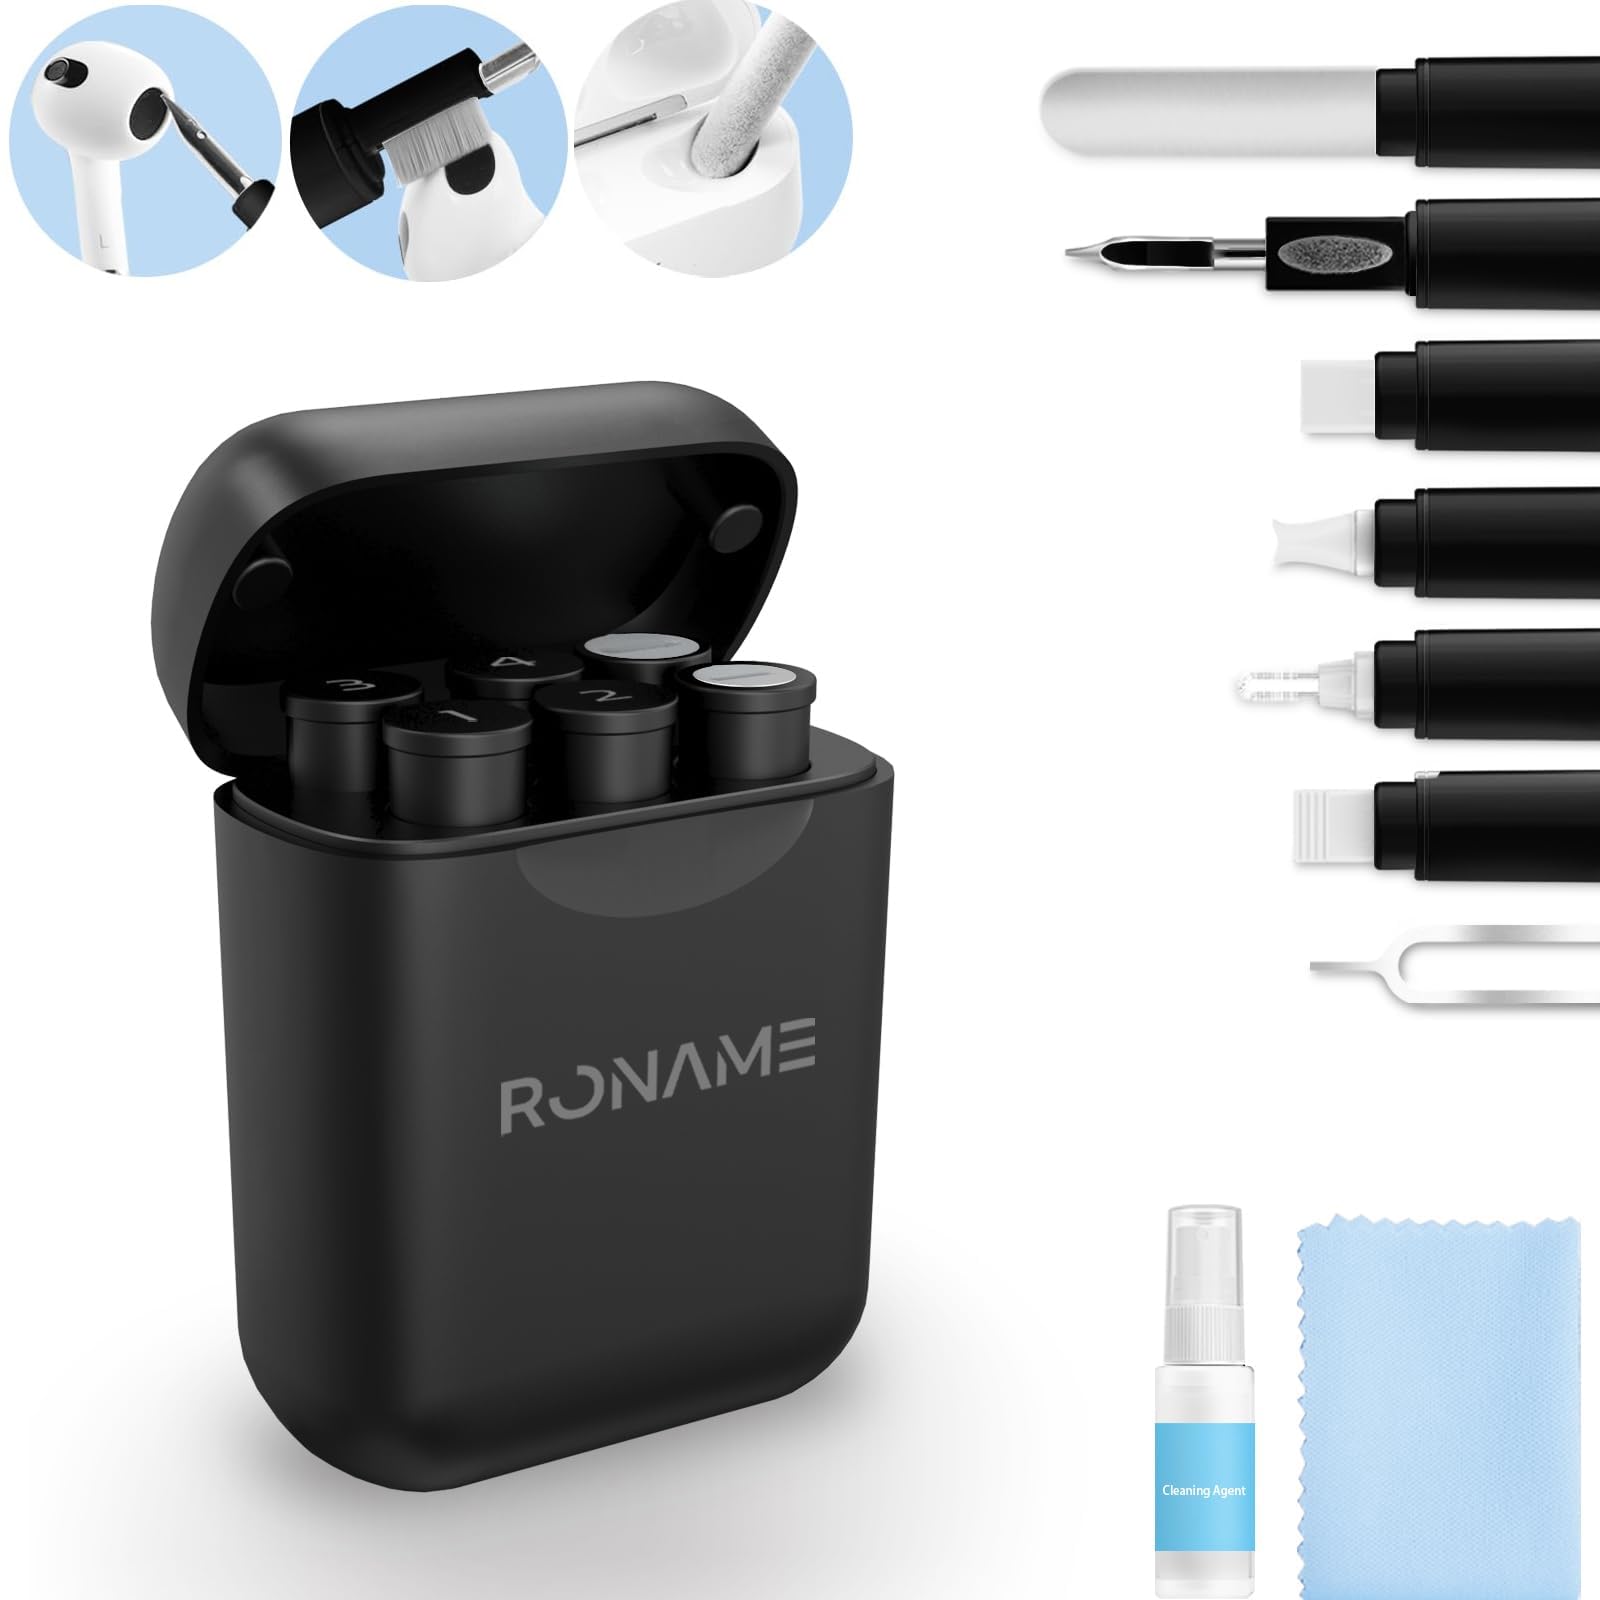 Cleaner Kit for Airpod, iPhone Cleaning Kit, Multi-Function Airpod Cleaner Kit Soft Brush for Phone Charging Port, Headphone, Earbuds, Earpods, Earphone,iPod, Case, iPhone, iPad, Laptop,Camera,Black